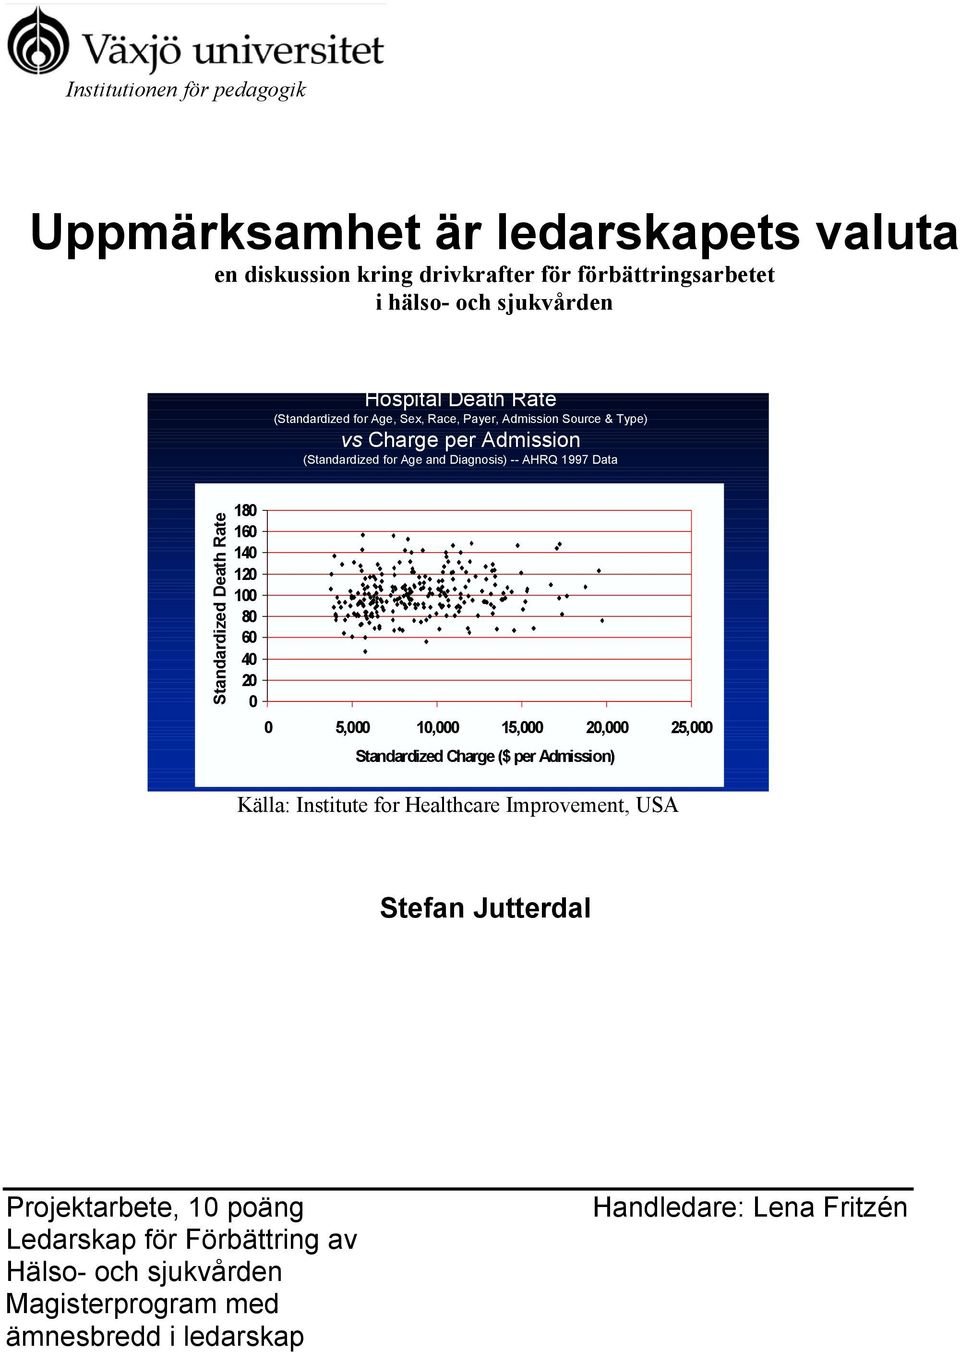 Rate 180 160 140 120 100 80 60 40 20 0 0 5,000 10,000 15,000 20,000 25,000 Standardized Charge ($ per Admission) Källa: Institute for Healthcare Improvement, USA